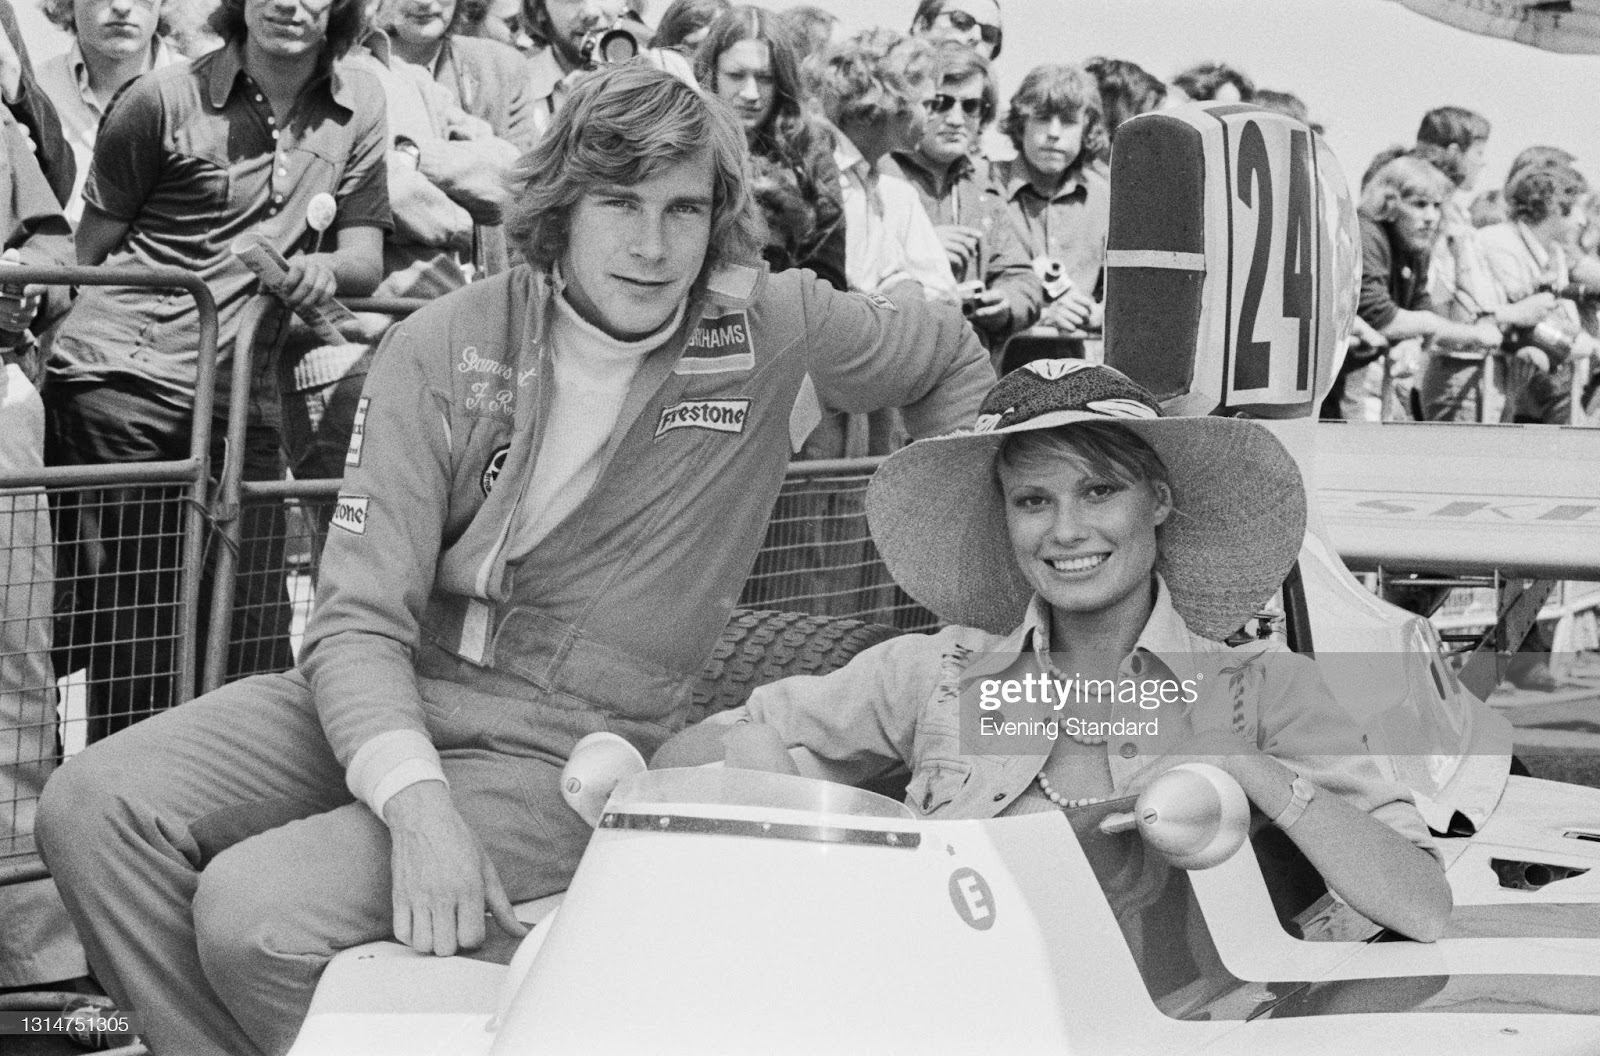 James Hunt (1947 - 1993) with his fiancée, fashion model Suzy Miller, during the 1974 British Grand Prix at Brands Hatch, UK, 20th July 1974.